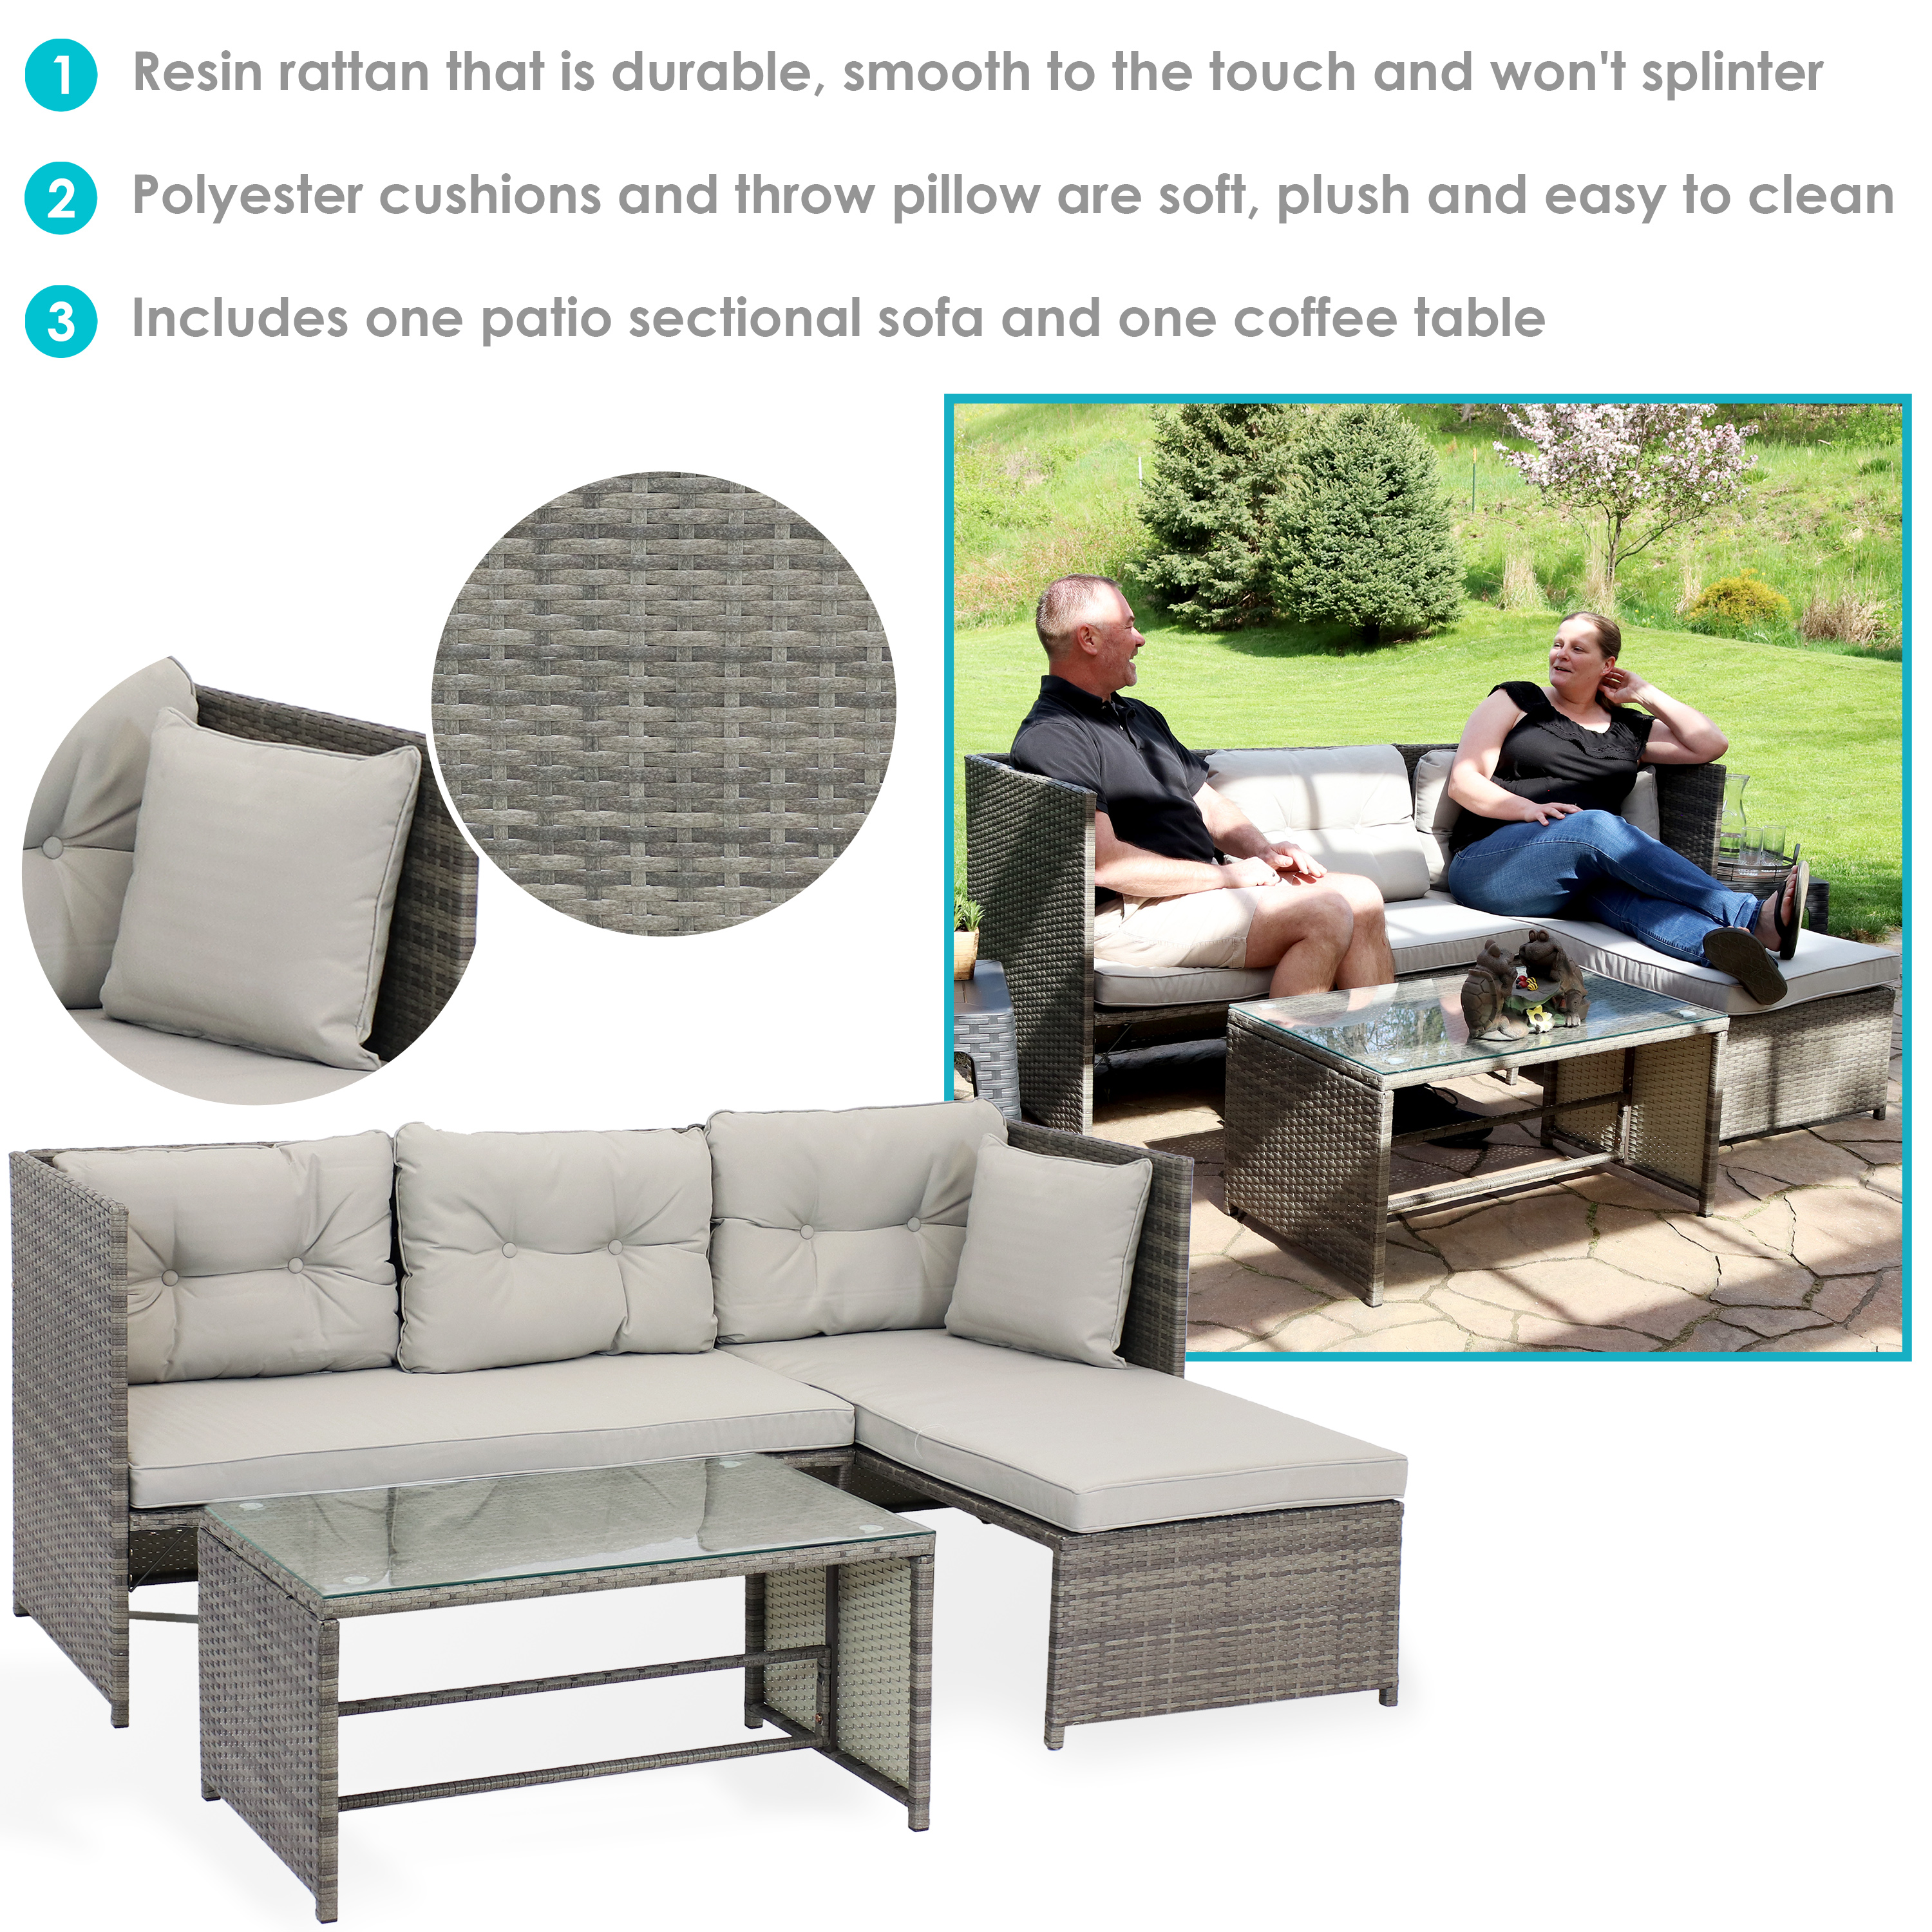 Sunnydaze Longford Outdoor Patio Sectional Sofa Set with Cushions - Stone Gray - image 4 of 12